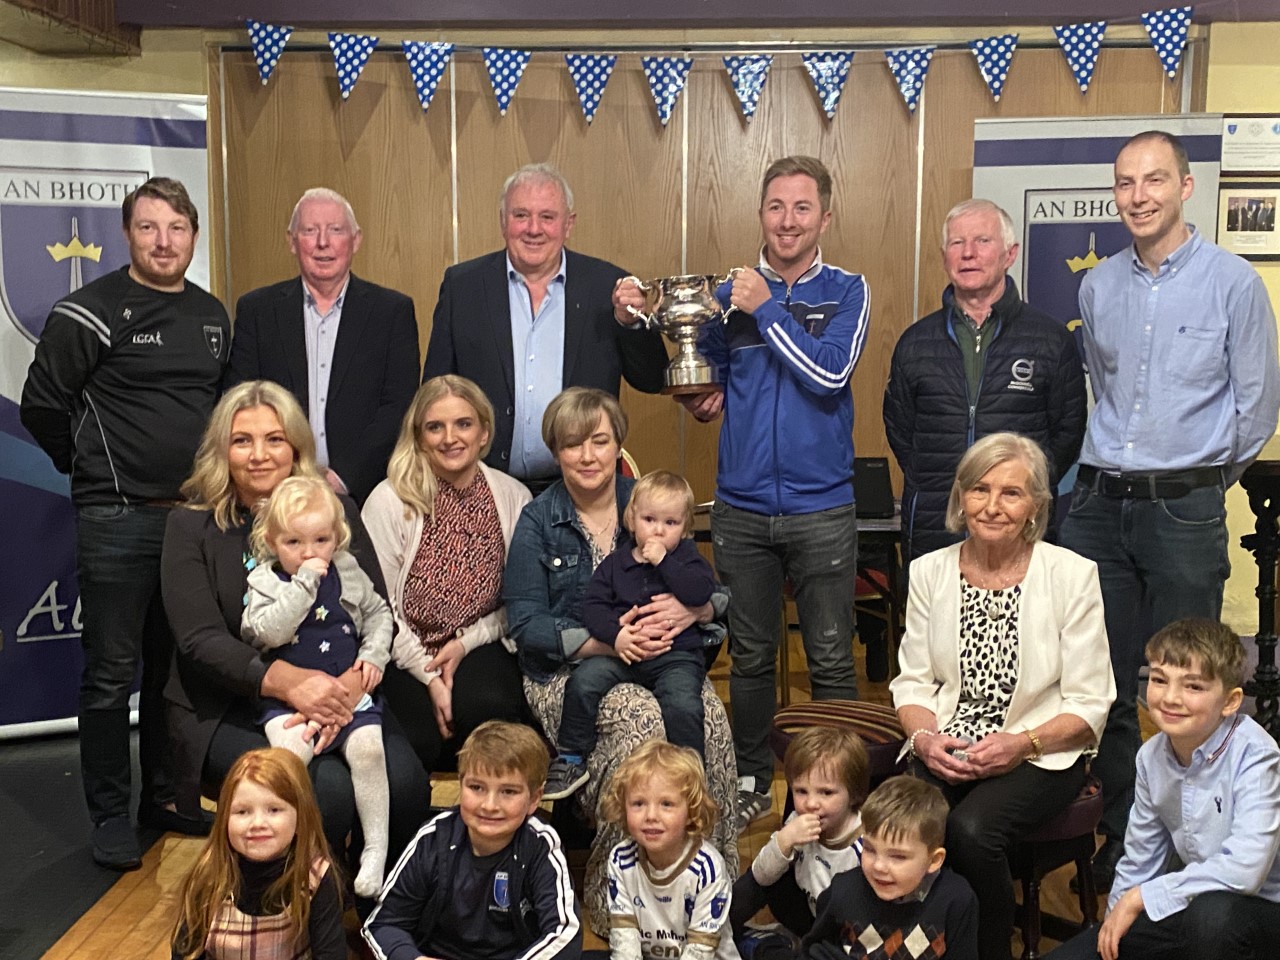 Monaghan GAA proudly accepts the new Liam Stirrat Cup for the Junior Championship